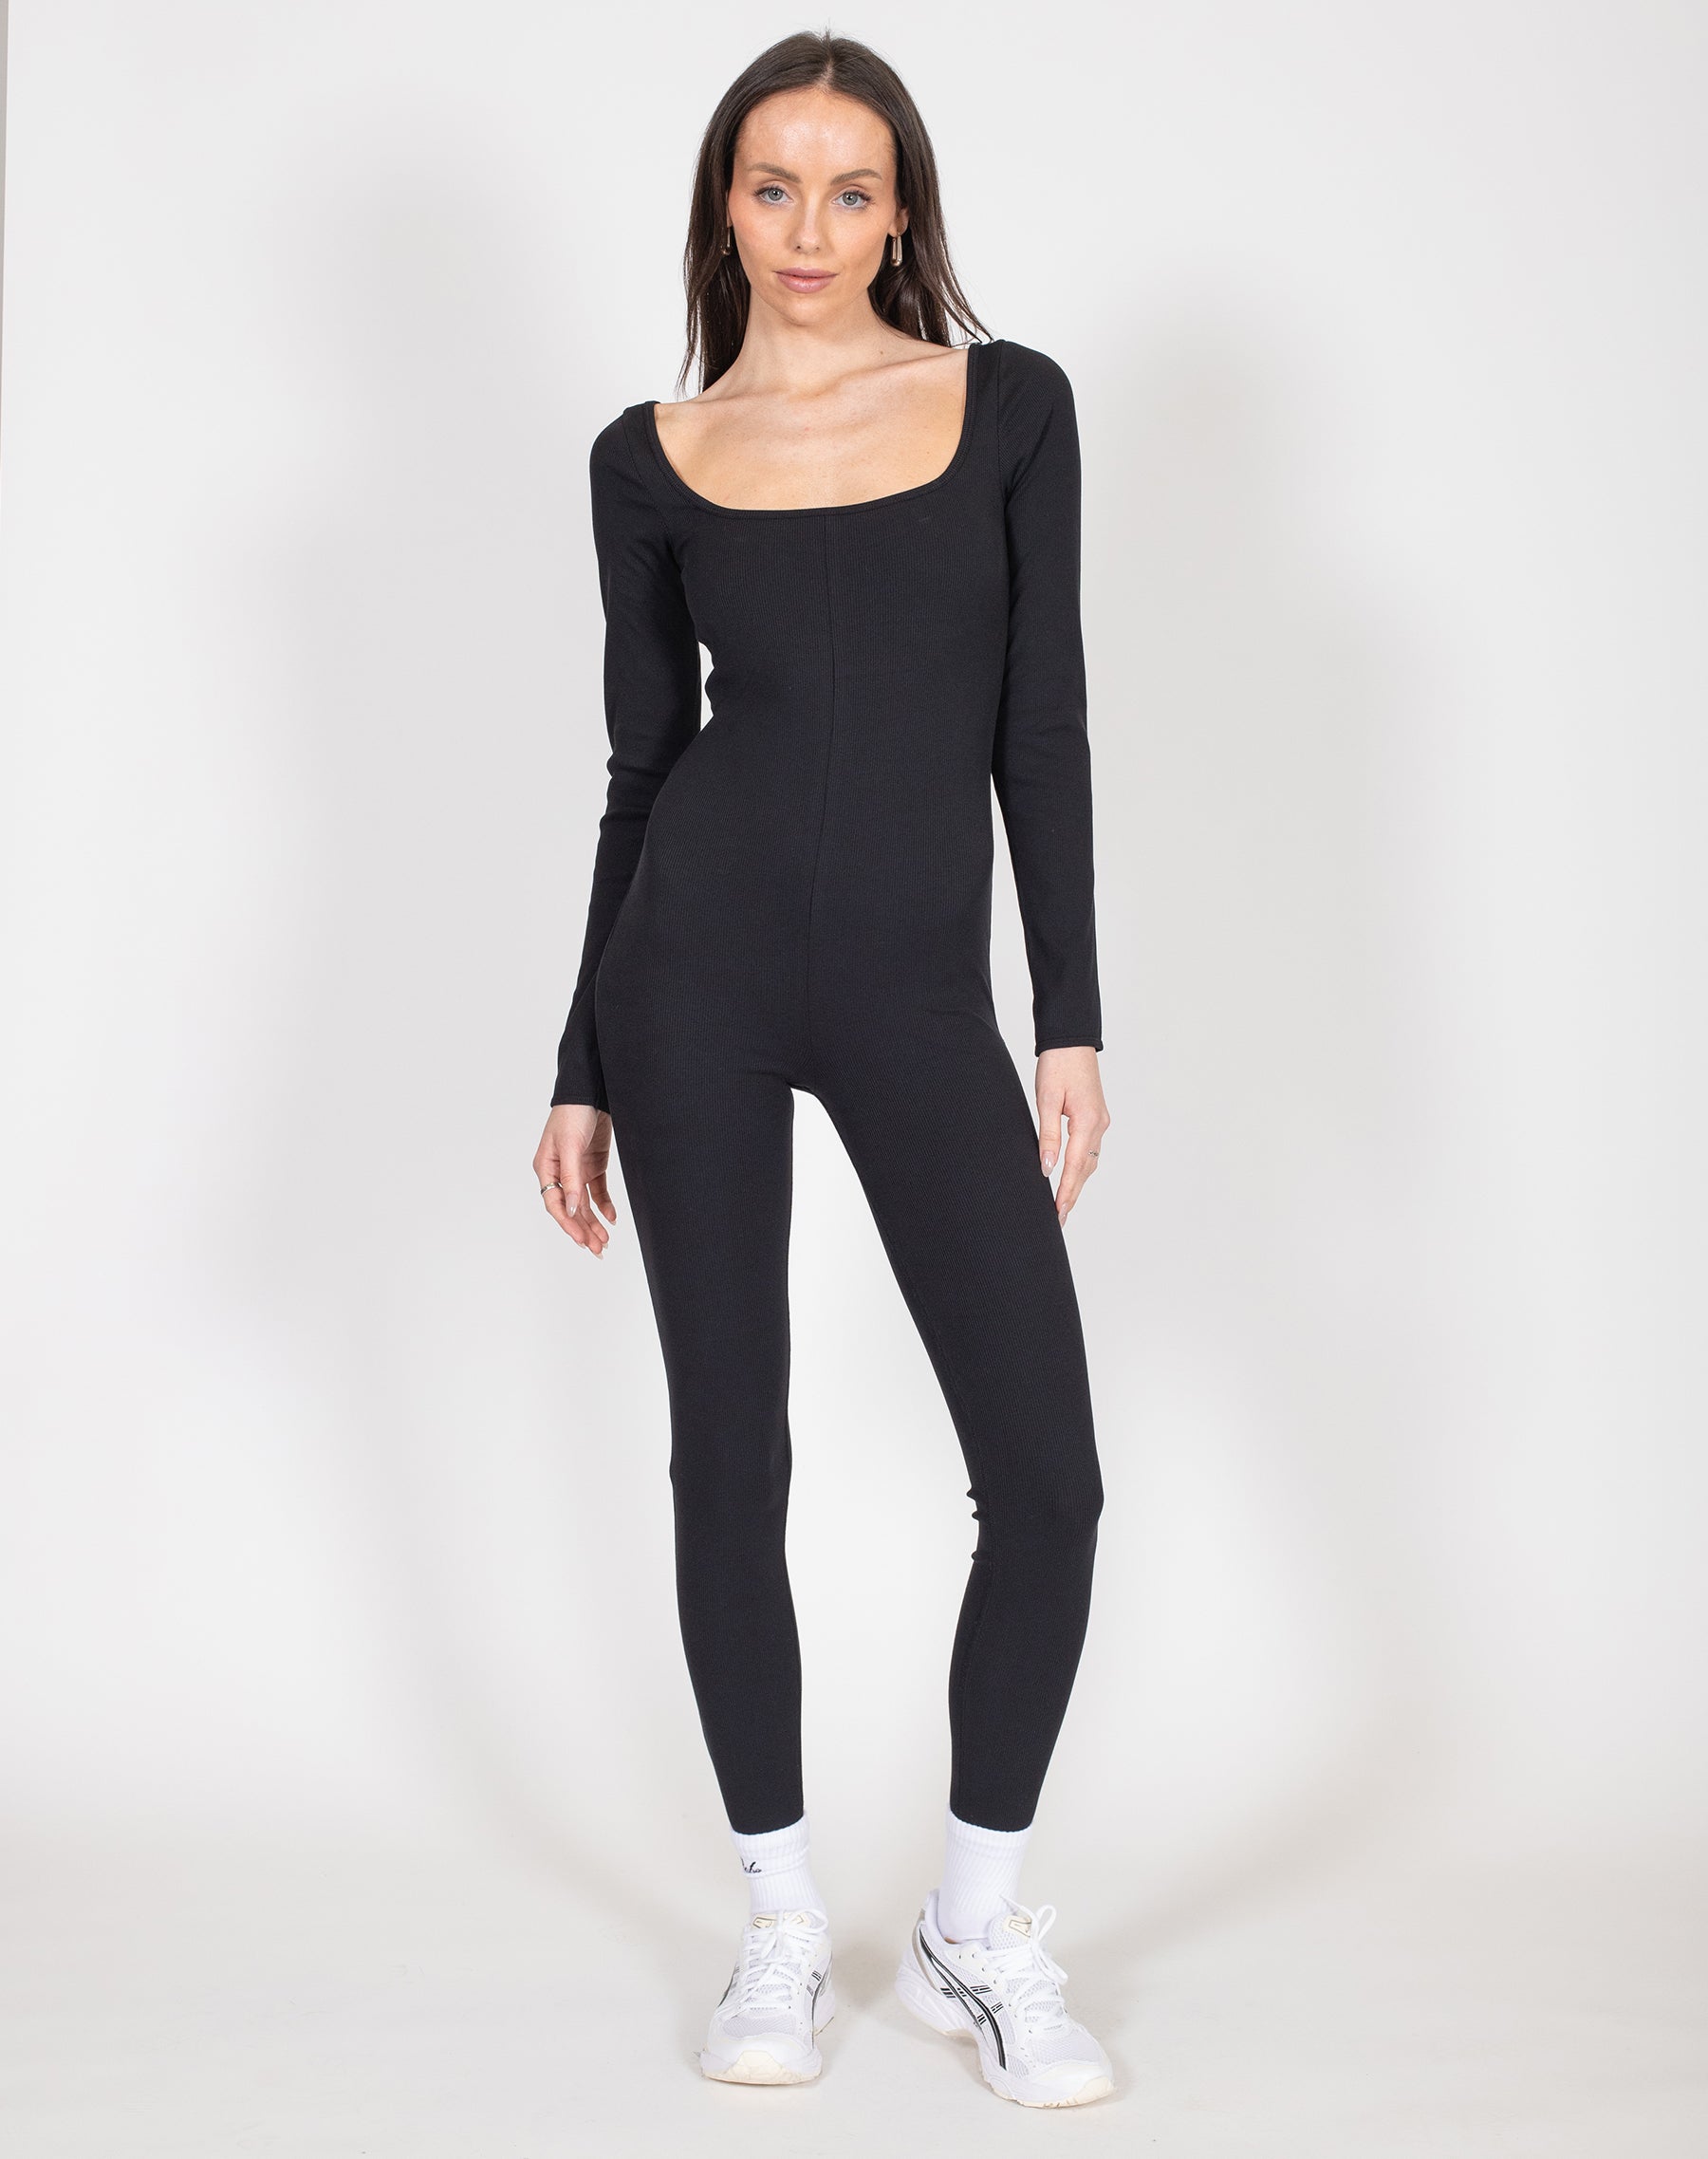 Naked Wardrobe Long Sleeve Jumpsuit Black Ribbed Catsuit Zipper Closure  Size XL - $35 (61% Off Retail) - From Lindsey